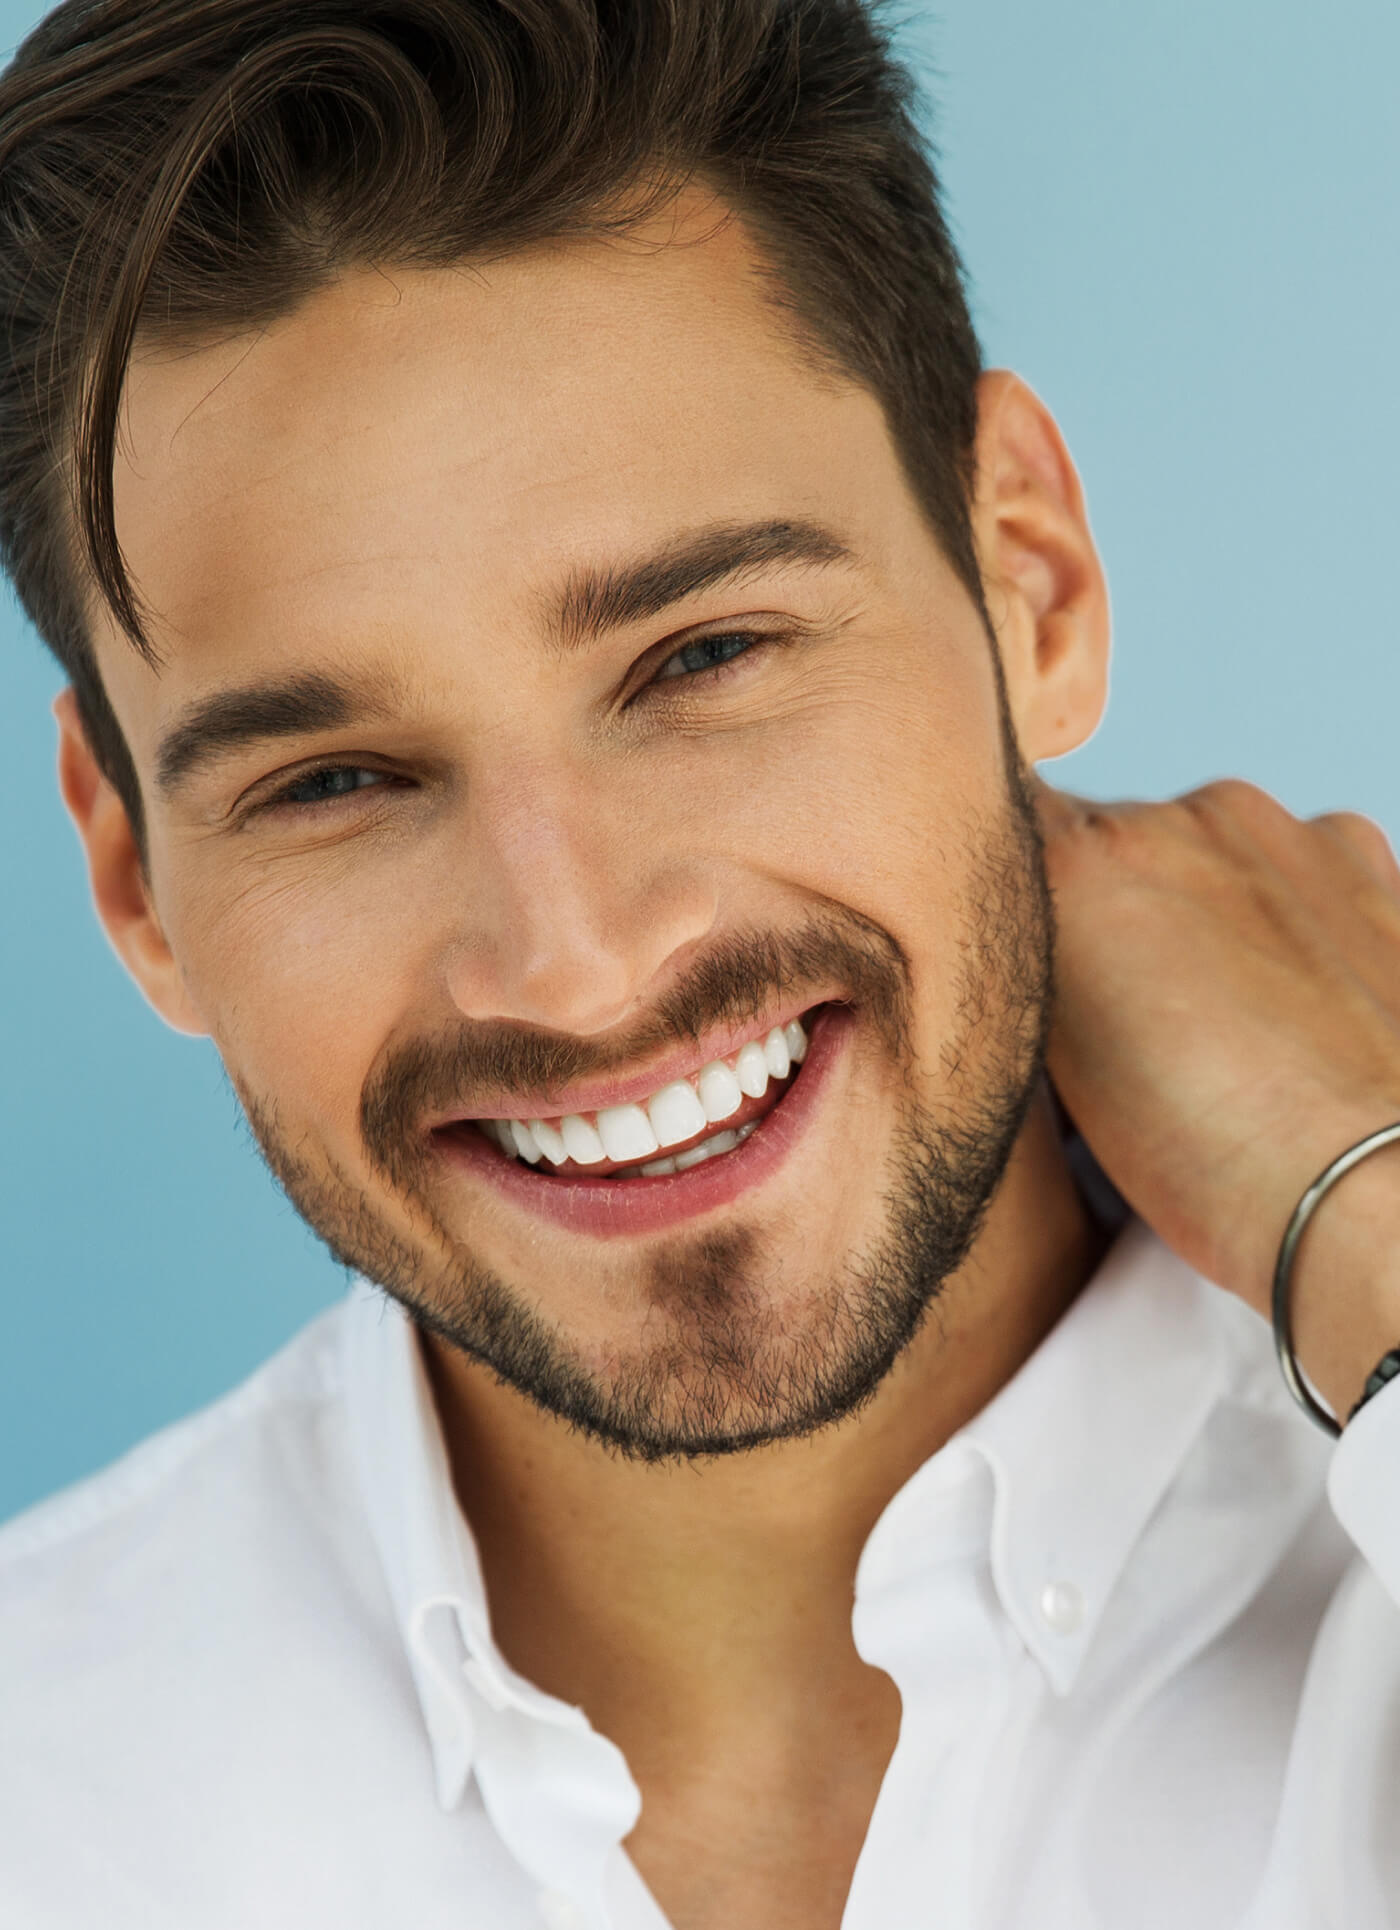 homme-sourire-orthodontie-linguale-invisible